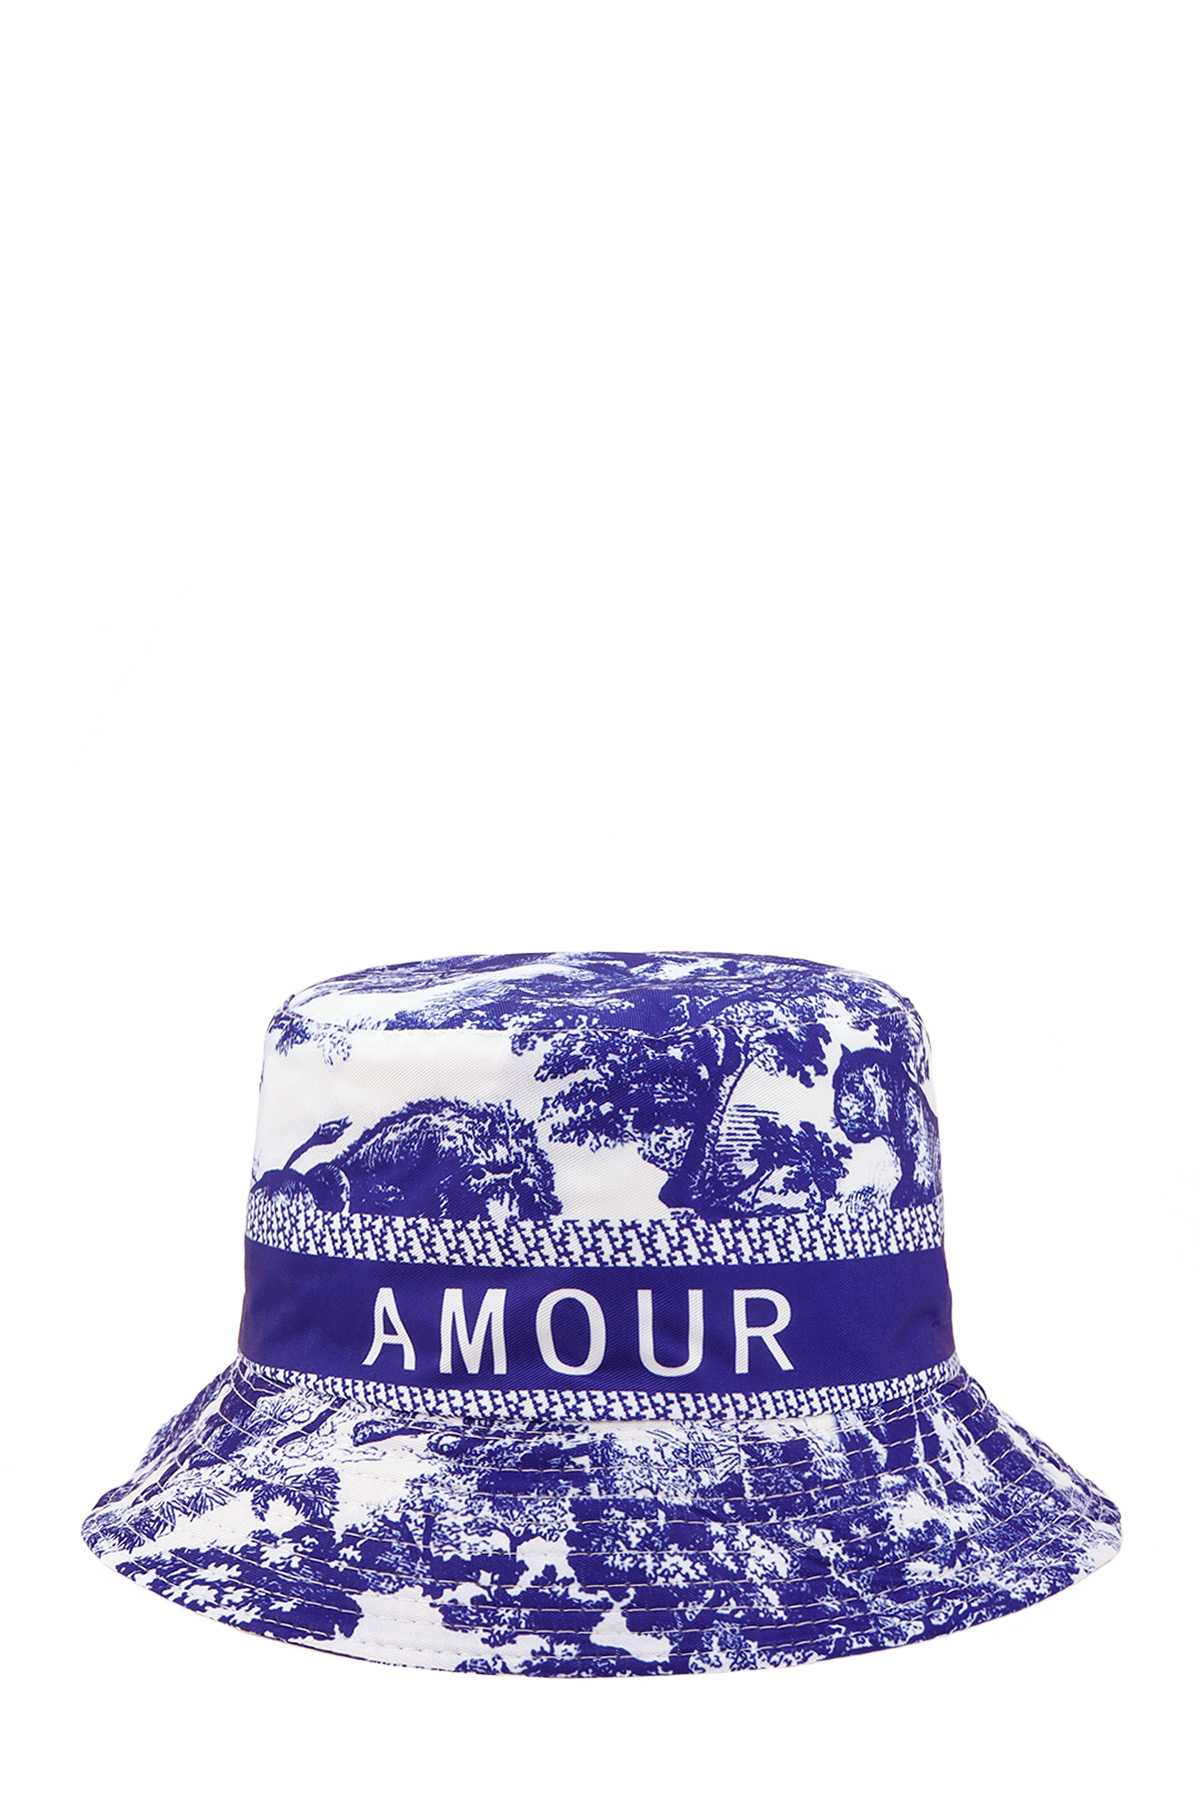 Tree and Amour Printed Reversible Bucket hat